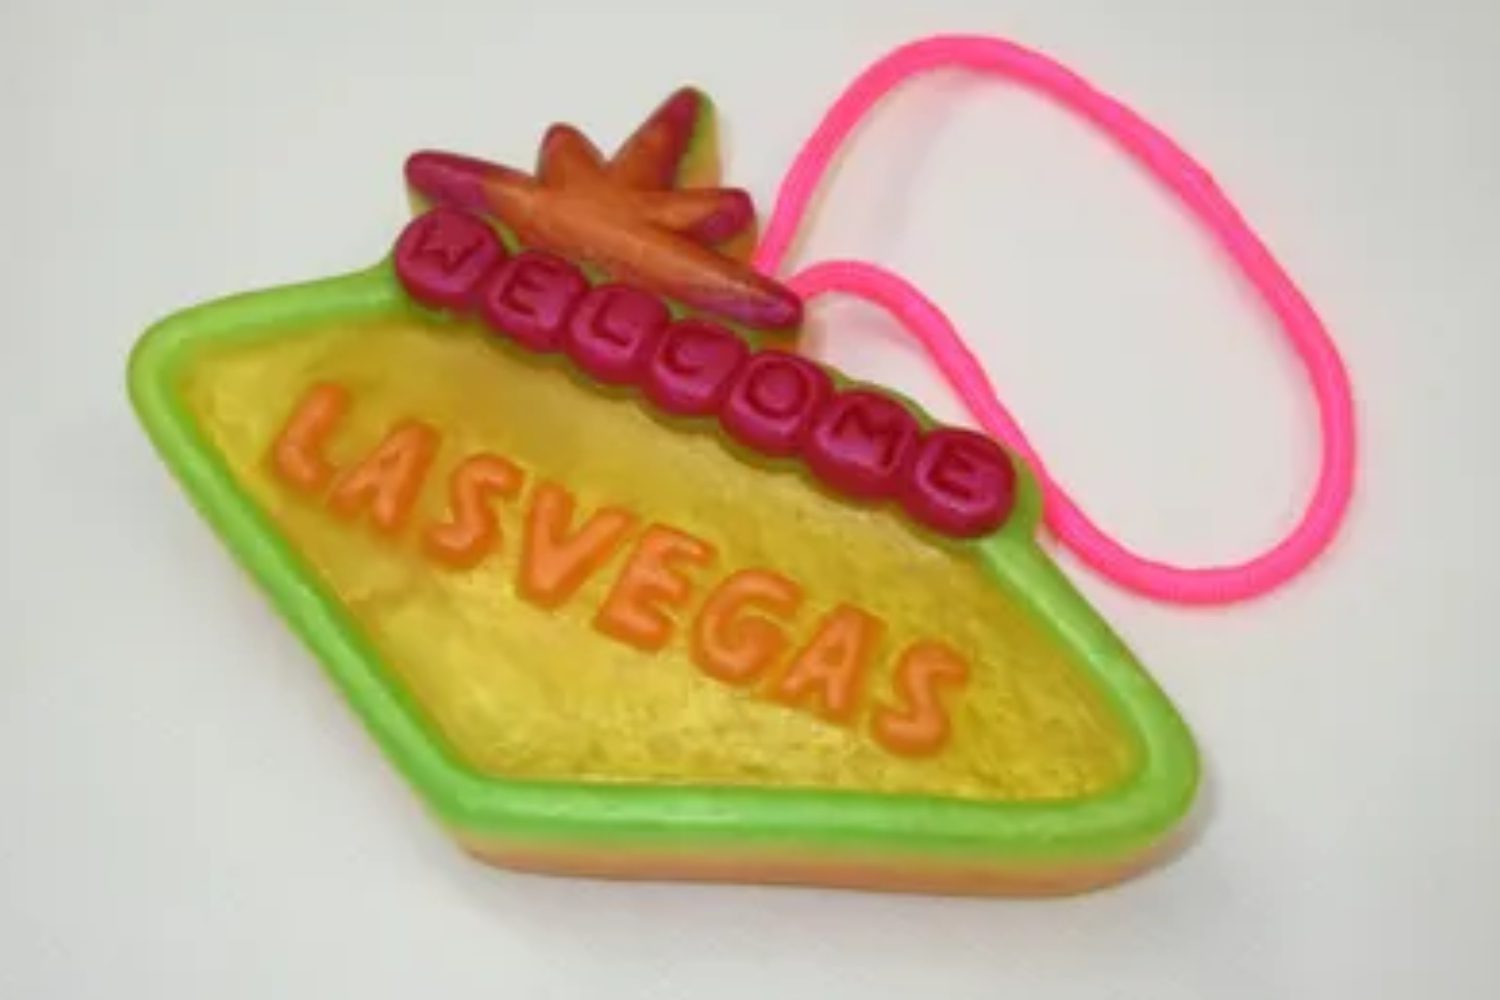 A neon sign with the word las vegas written on it.